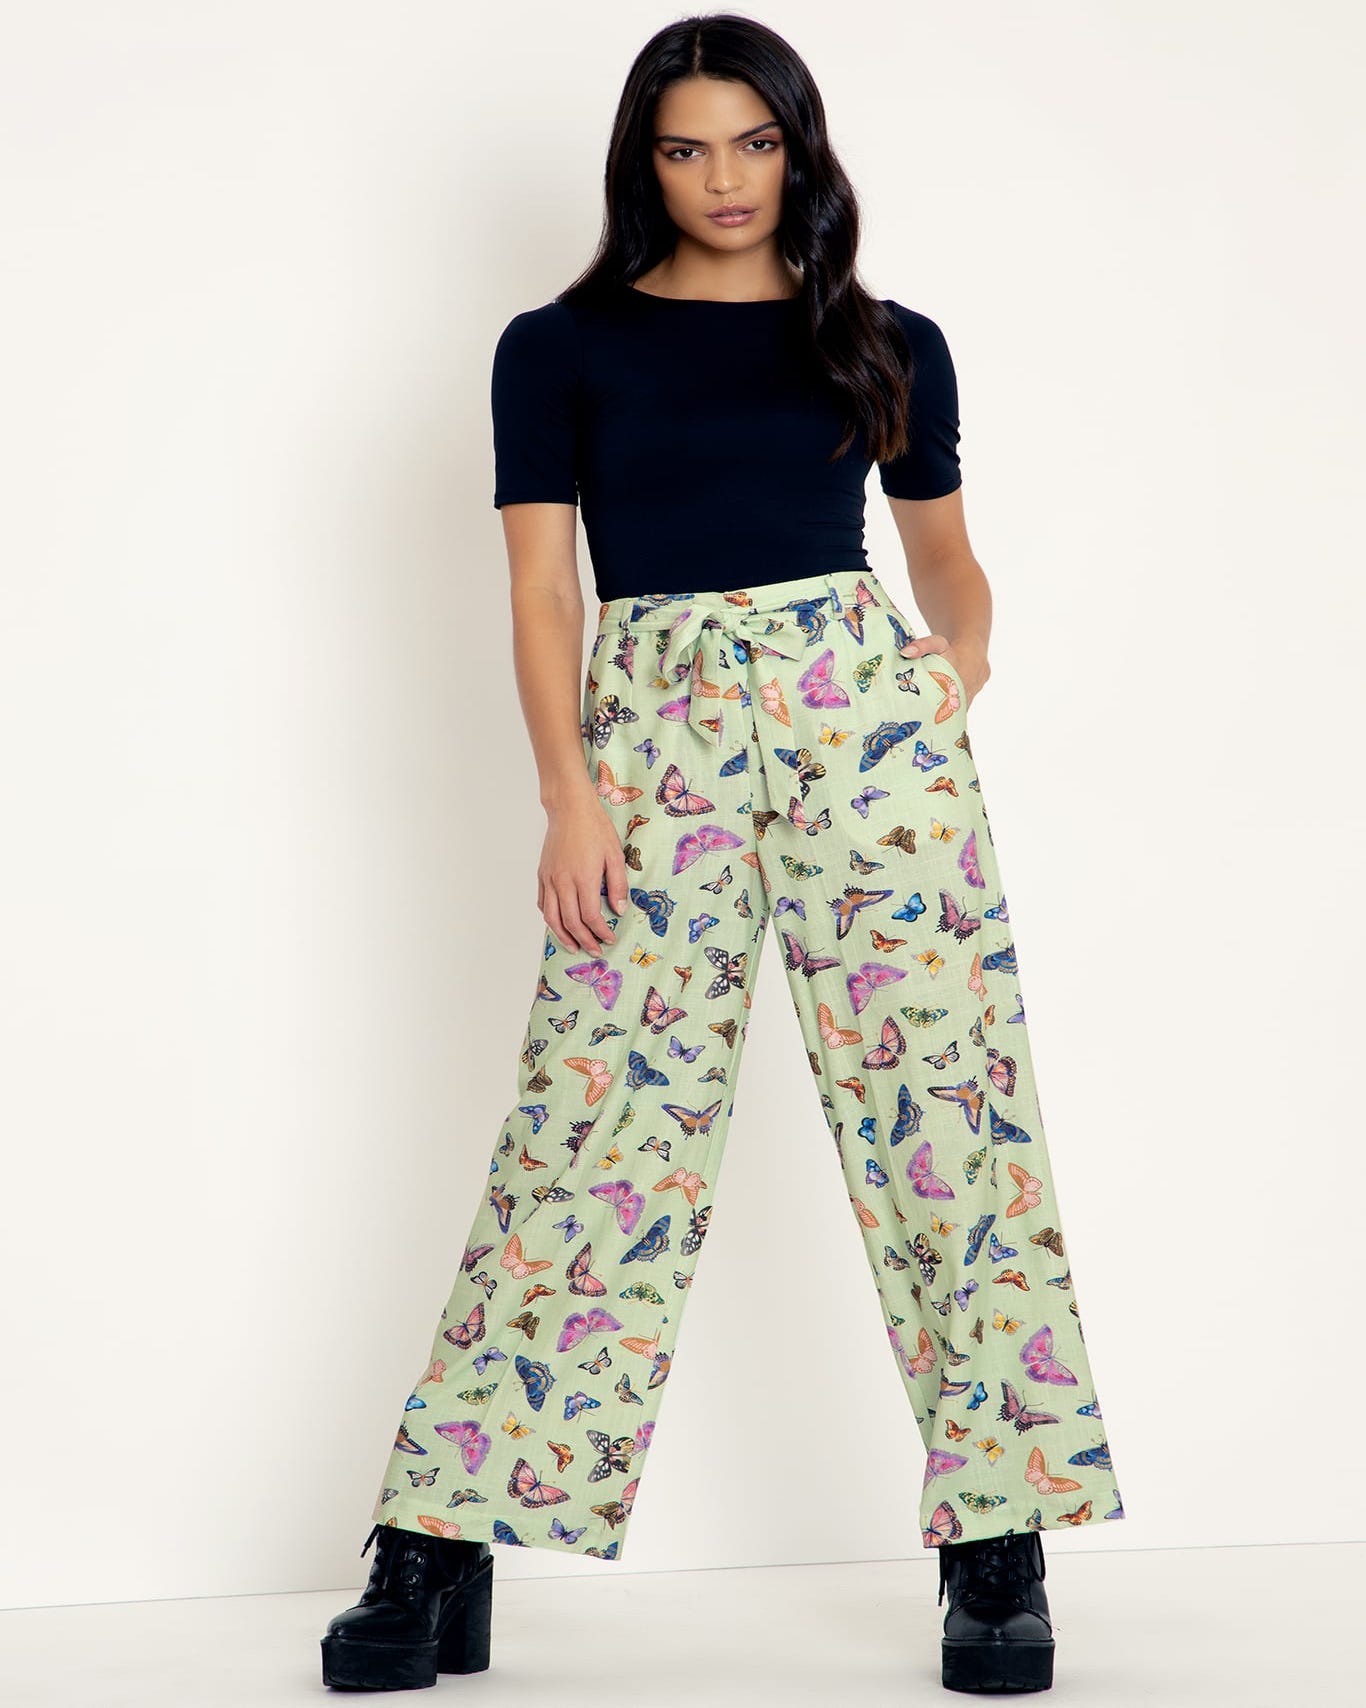 Flutterly Cute Summer Pants - Limited